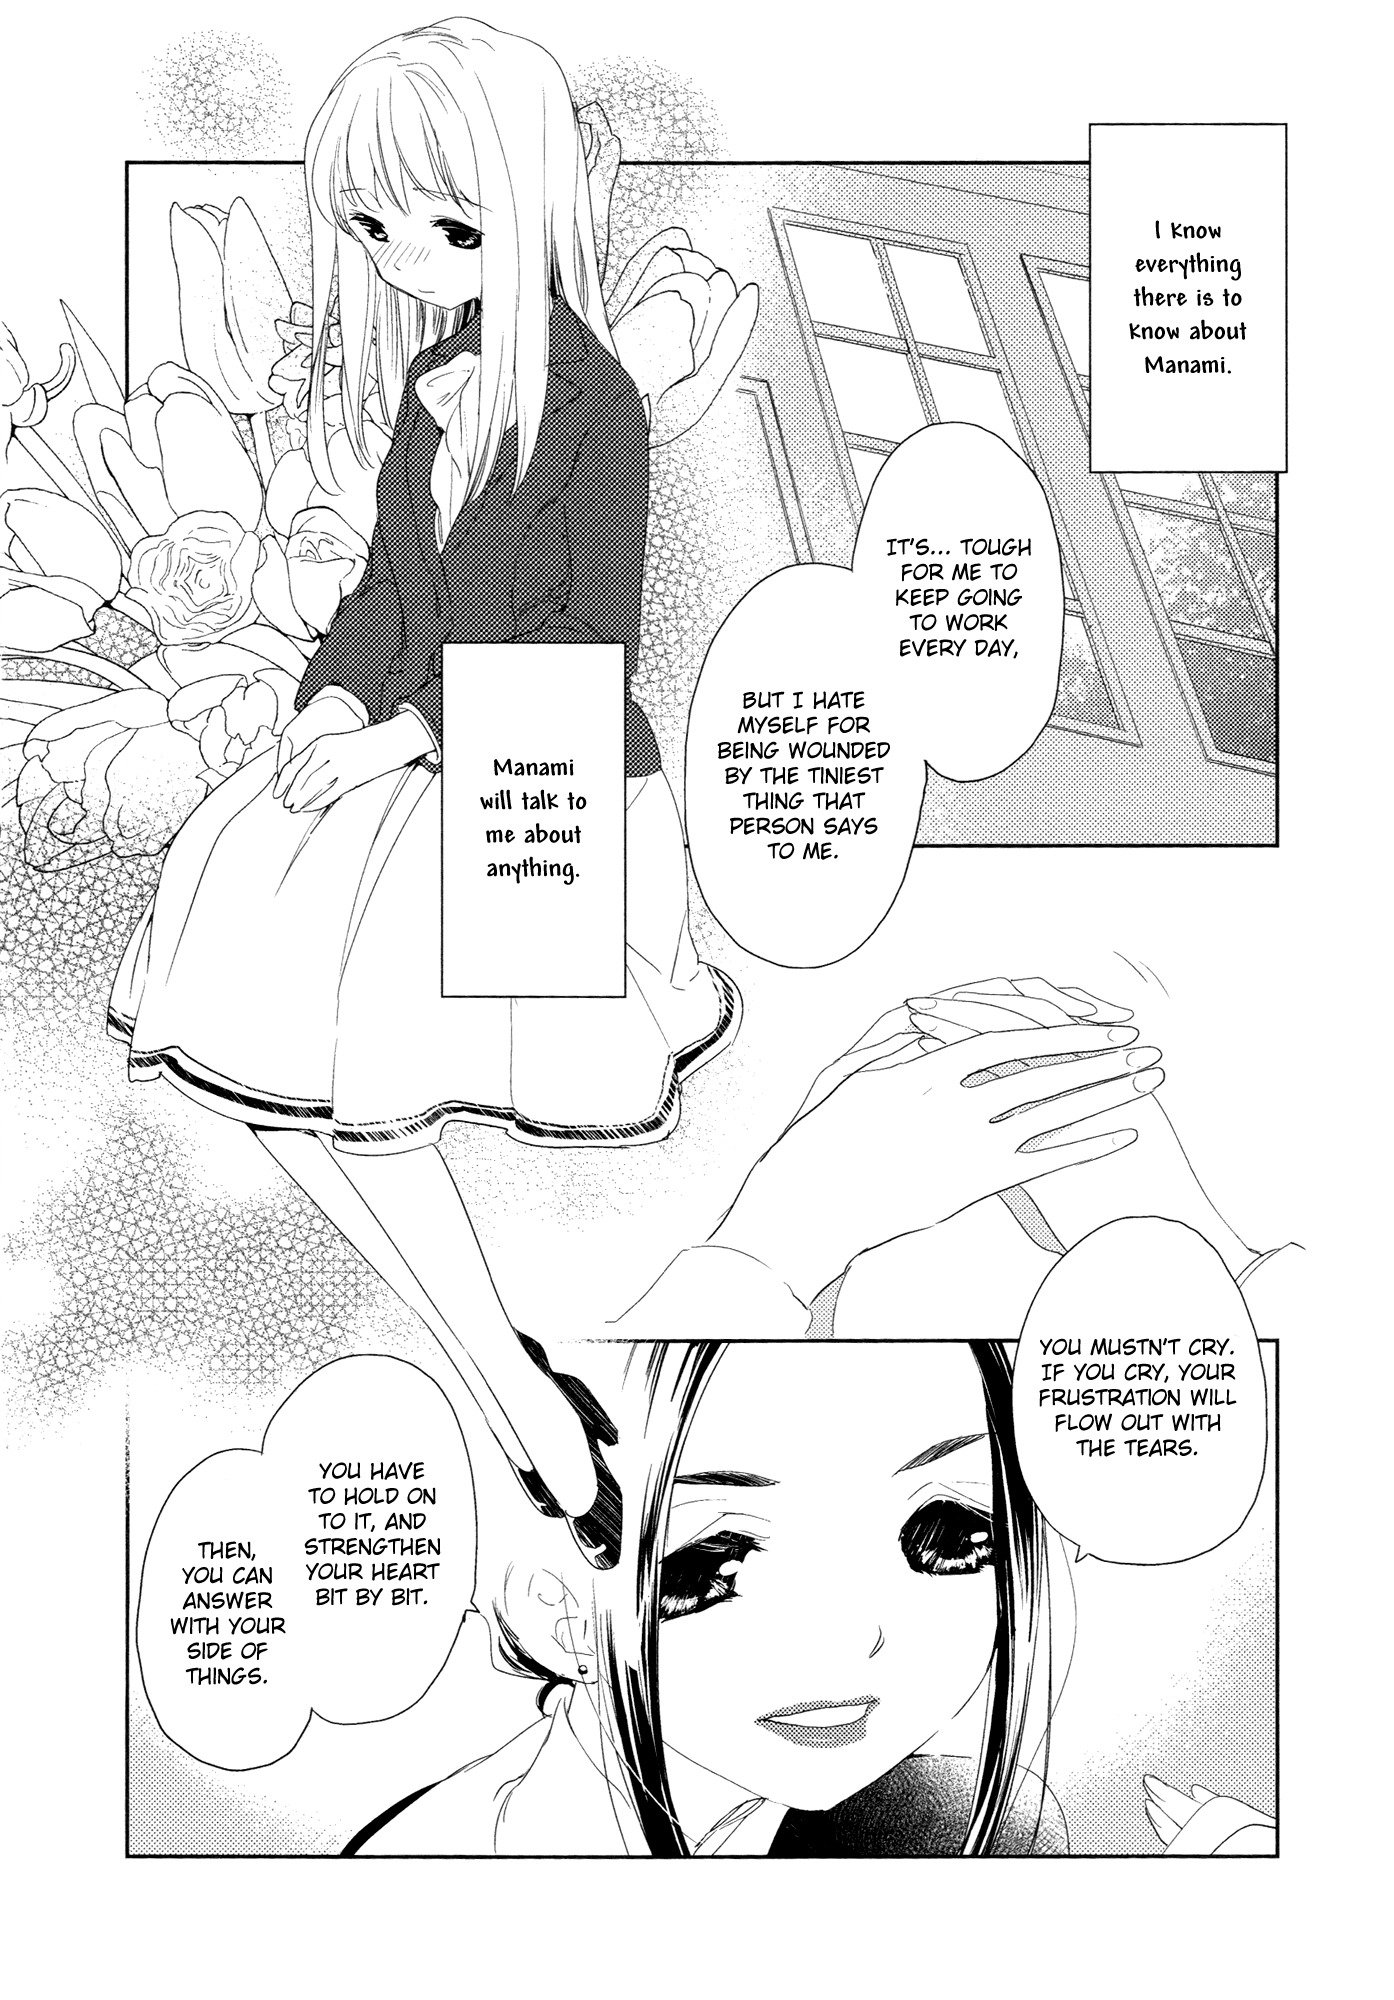 A Cold And After That - Page 2